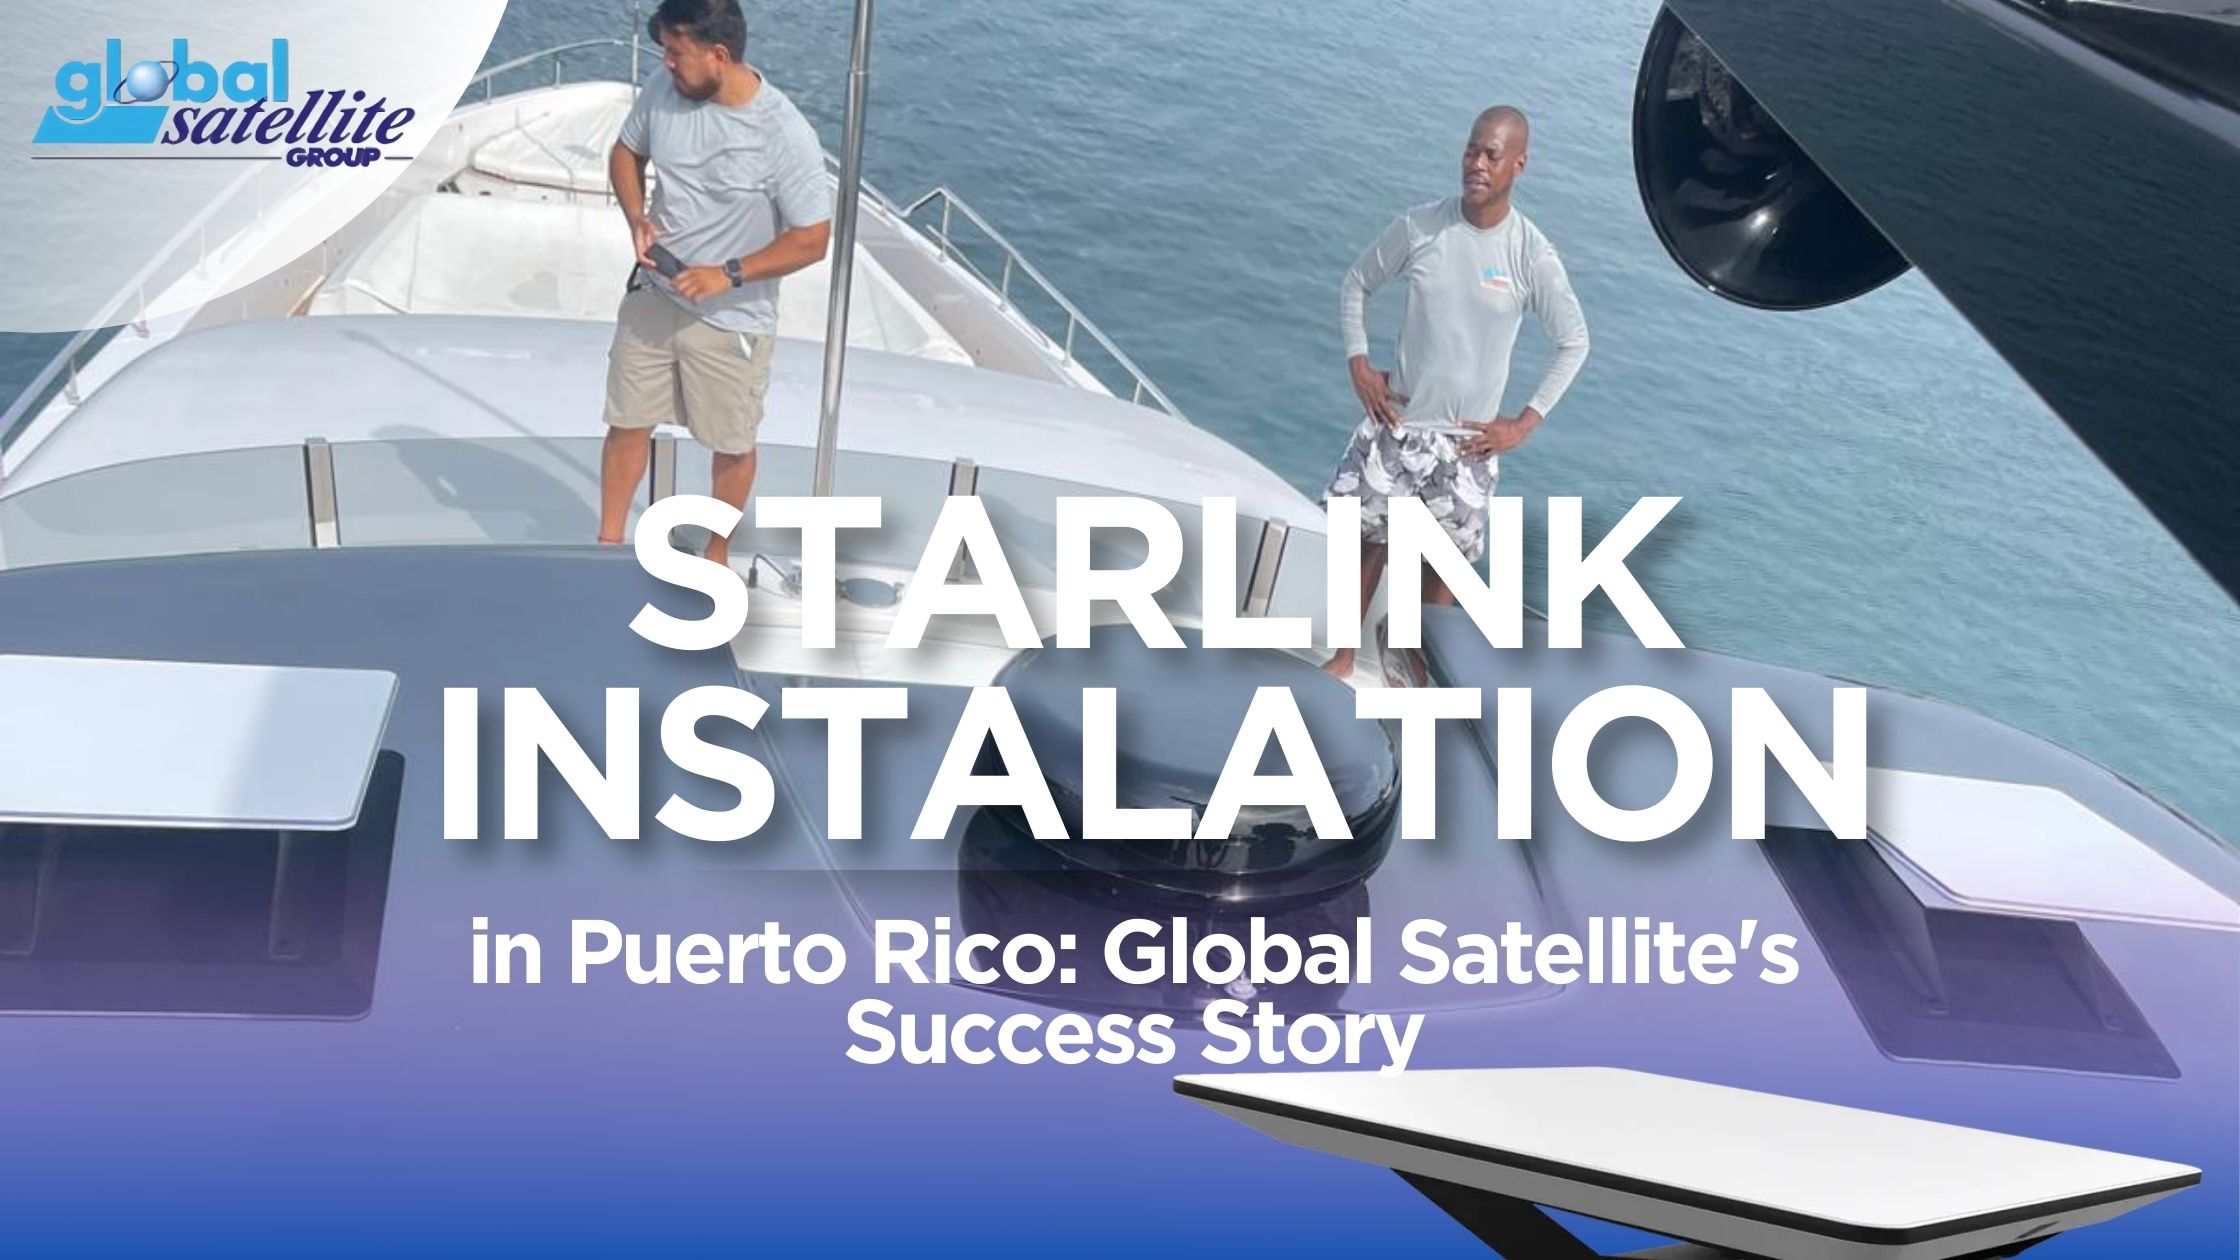 Starlink Installation in Puerto Rico: A New Era of Connectivity